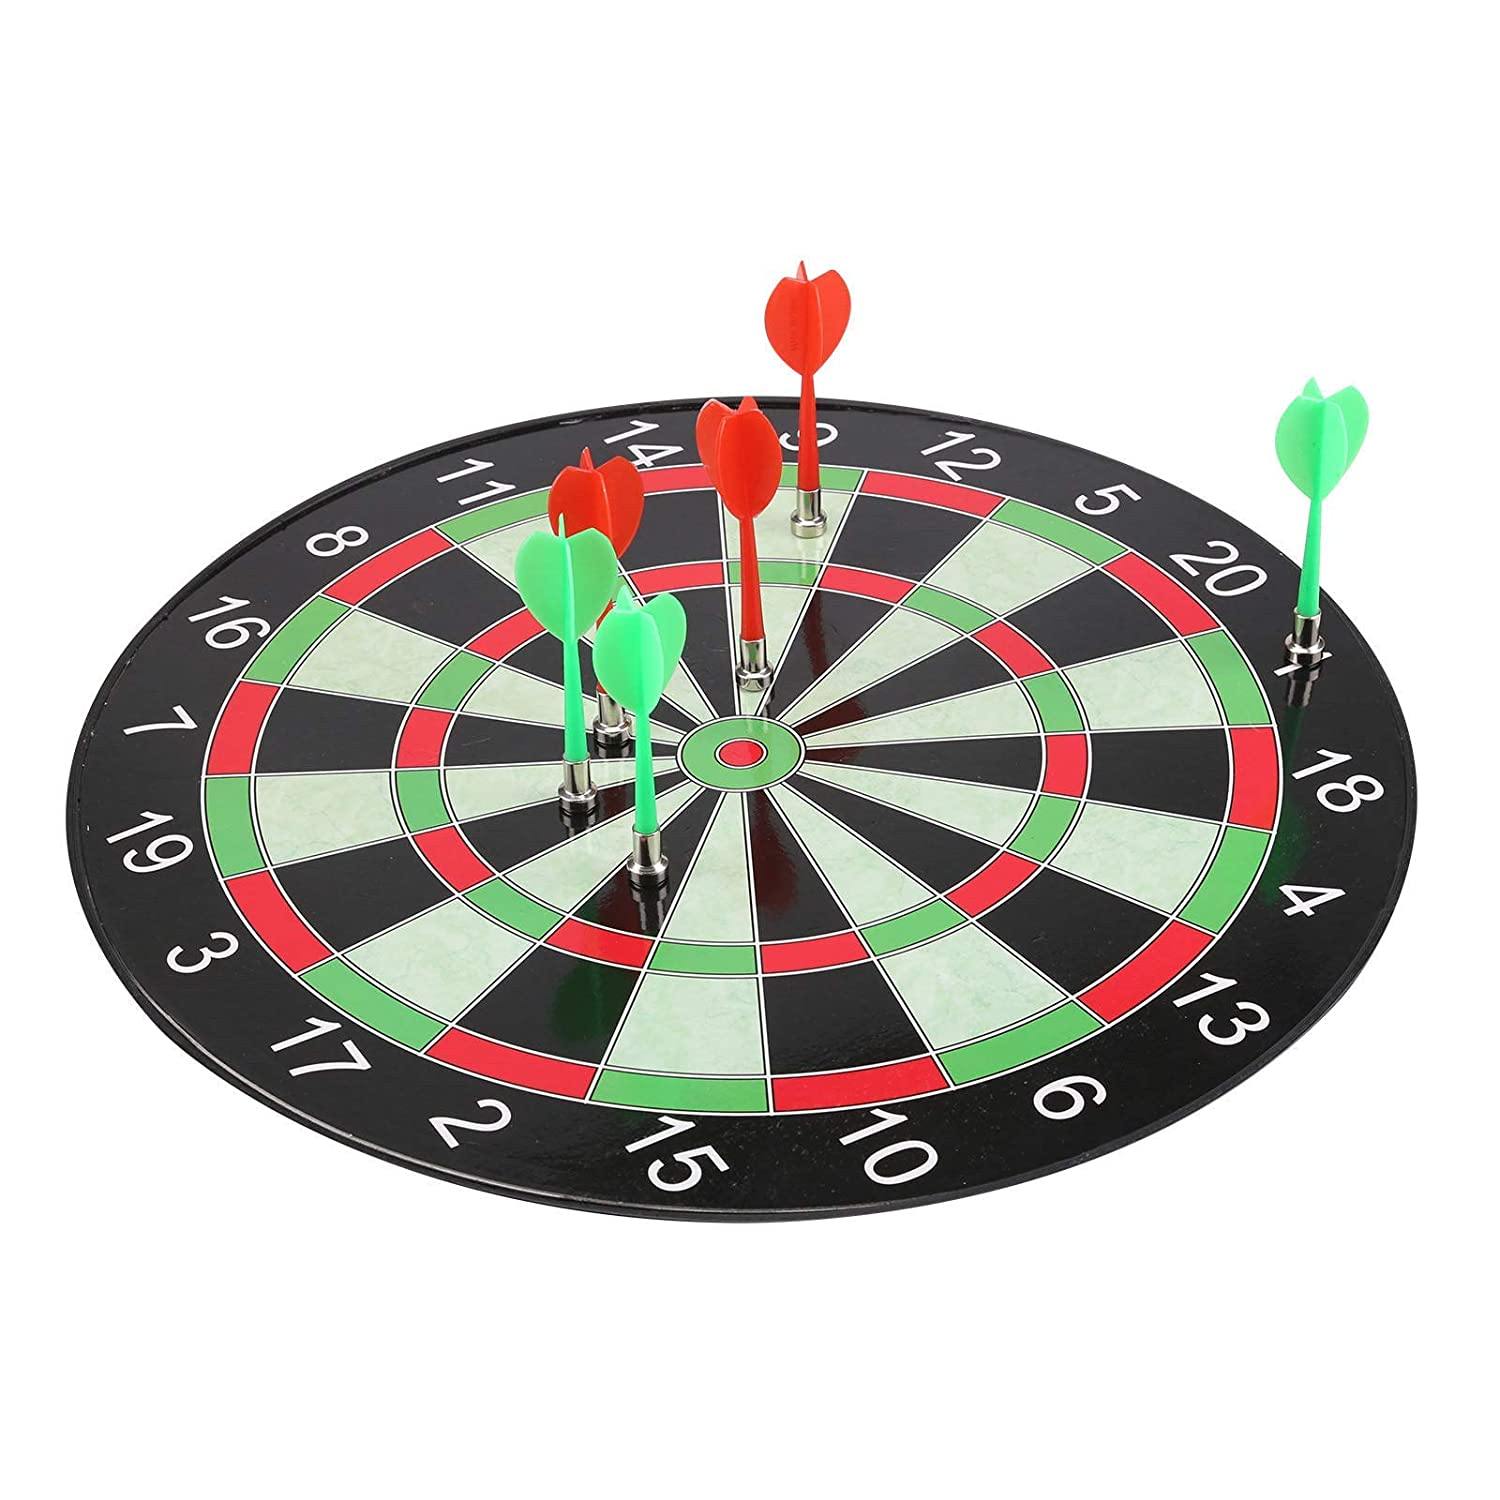 Prokick Double Sided Magnet Dart Board Game - with 6 Darts - Best Price online Prokicksports.com